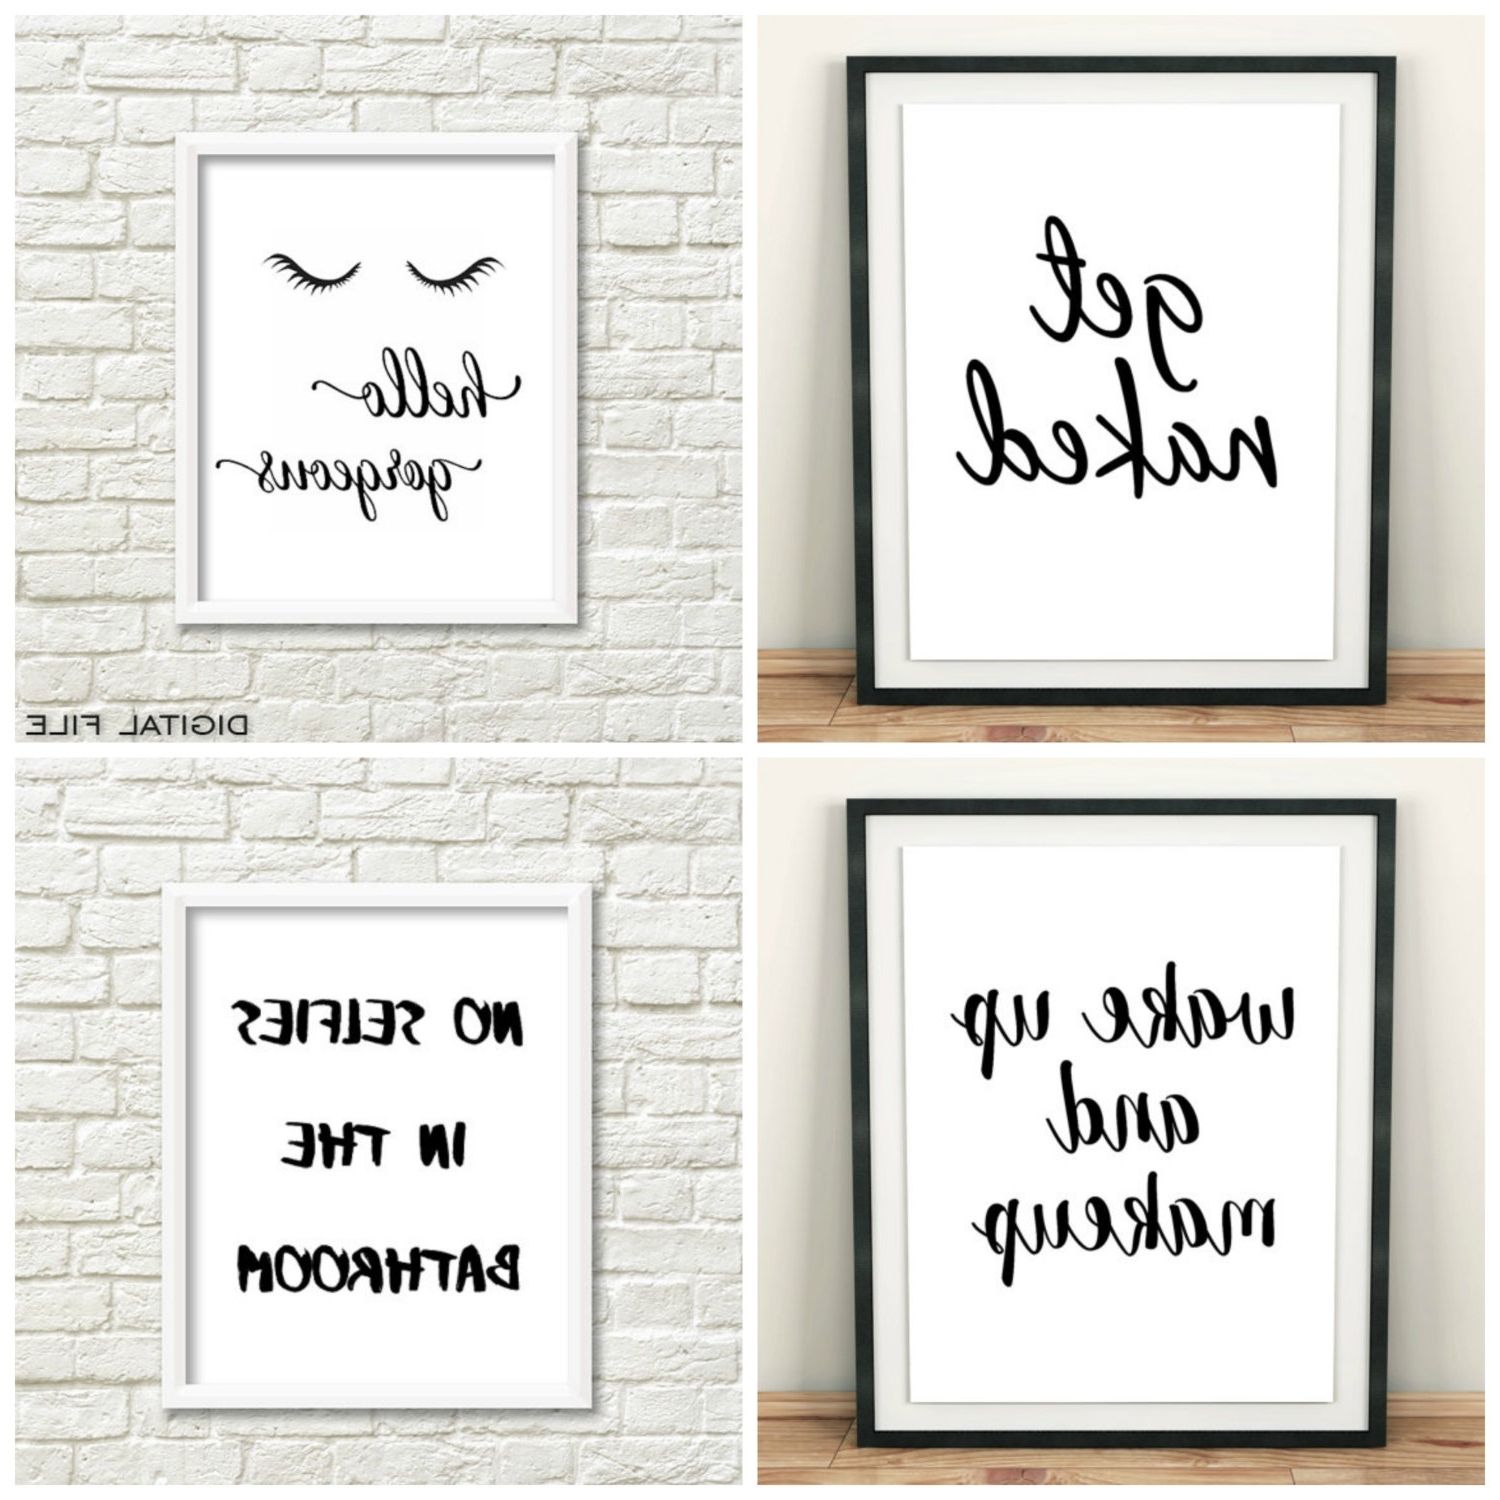 15 Ideas Of Canvas Wall Art Funny Quotes 30 Quotes